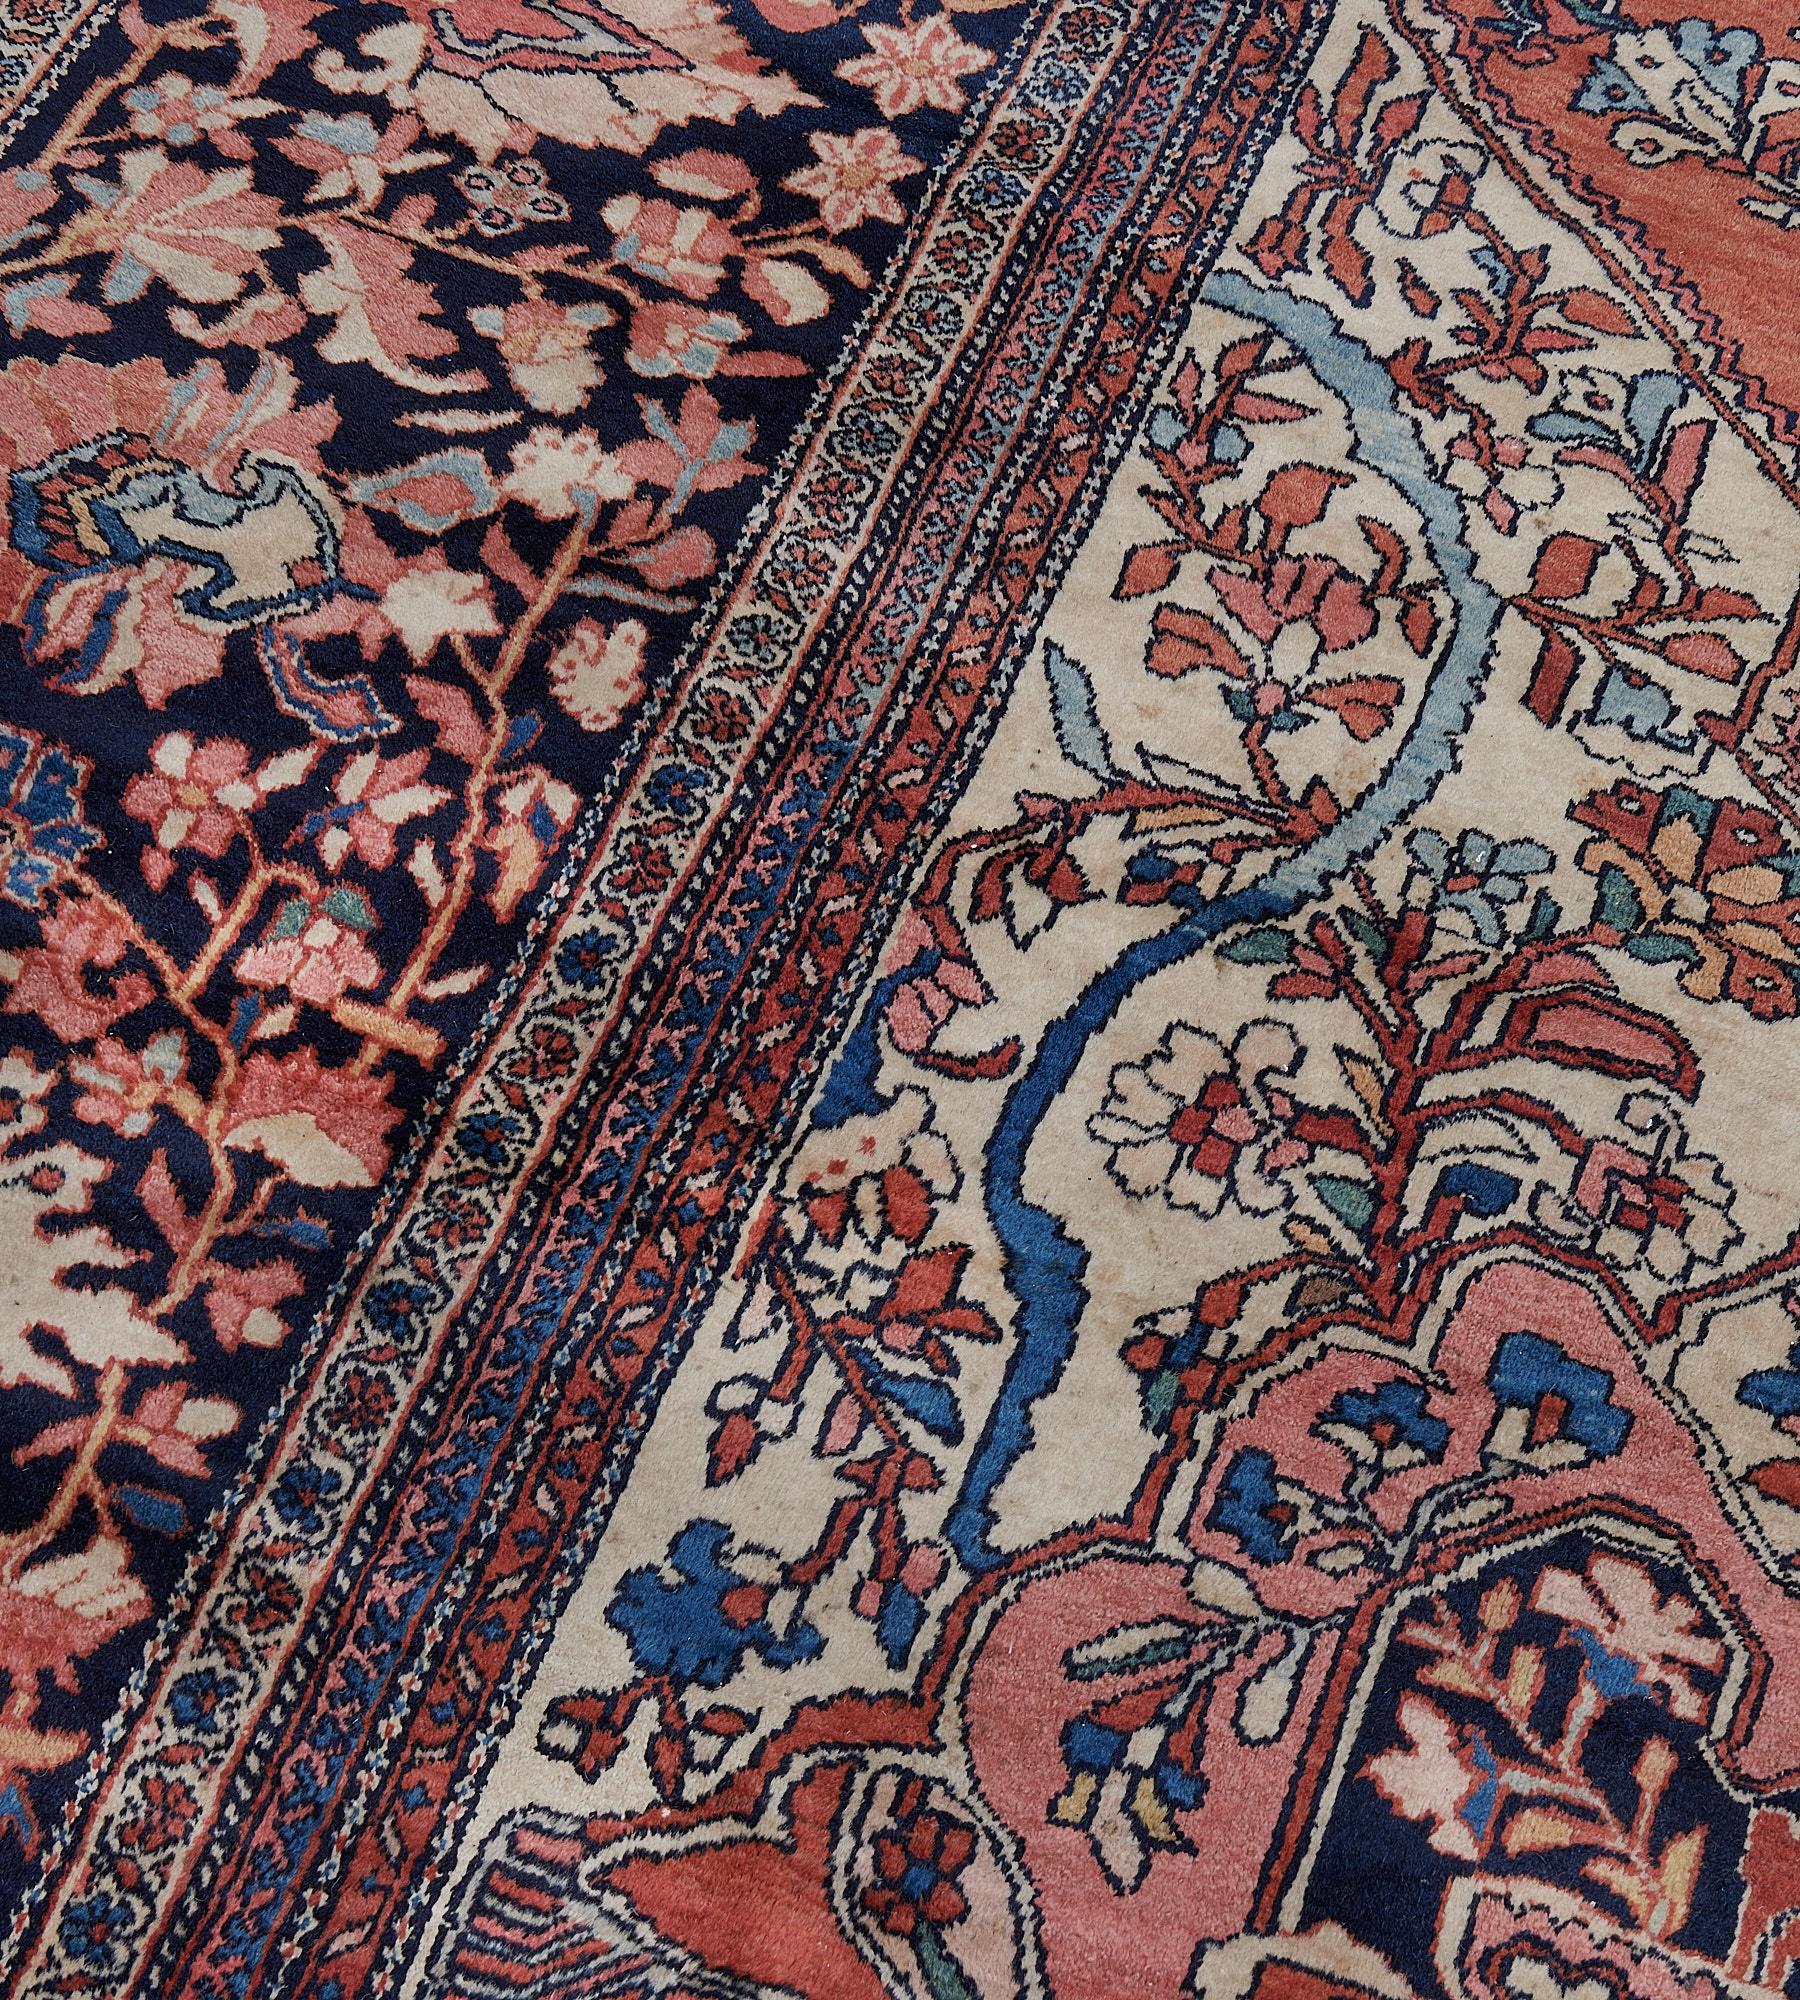 20th Century Antique Handwoven Persian Faraghan Rug in Perfect Condition For Sale